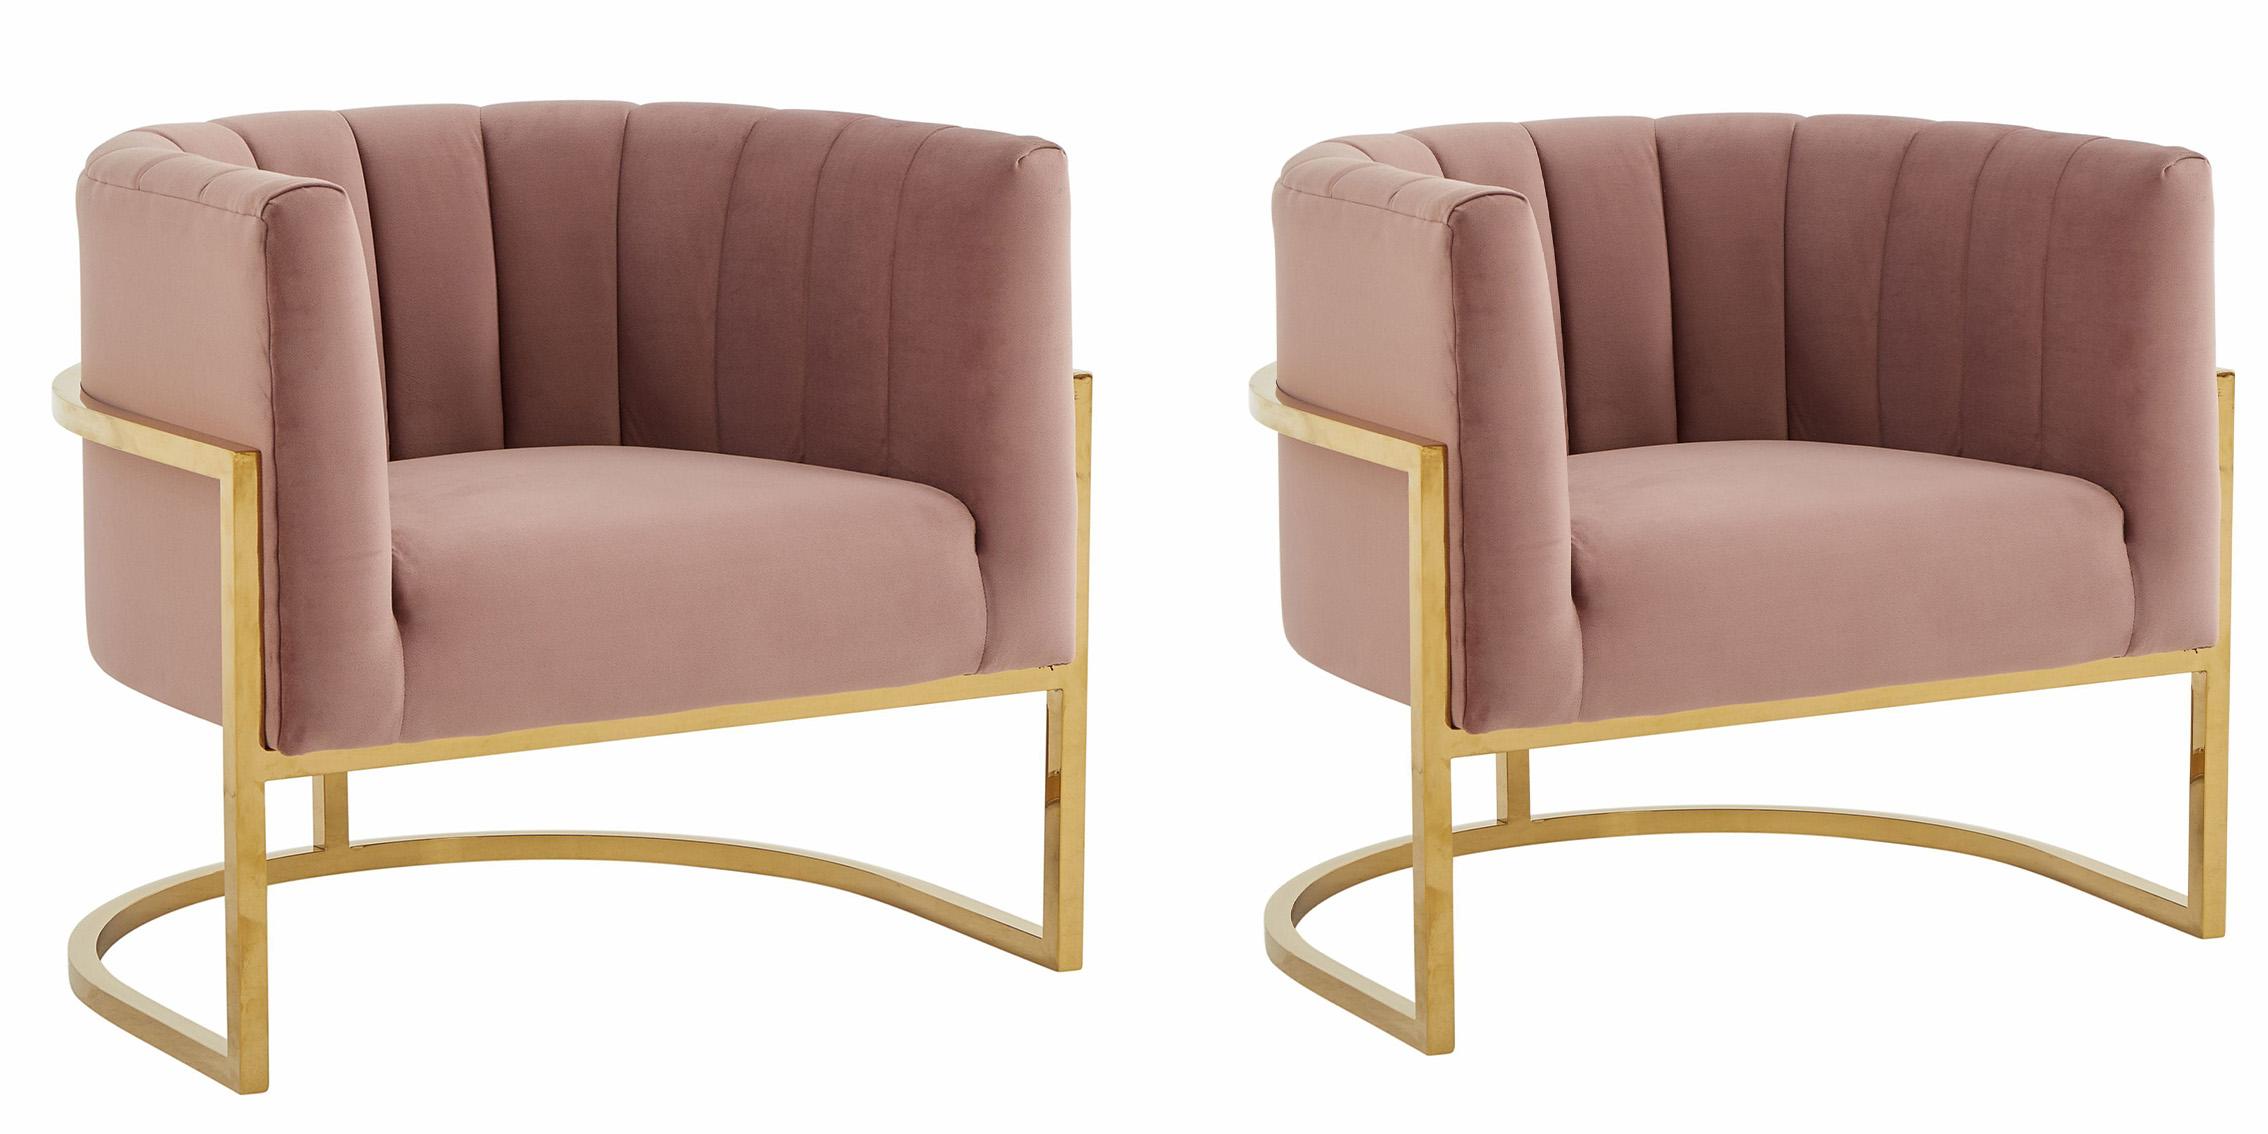 Contemporary, Modern Accent Chair Set VGRHAC-406-PINK-Set-2 VGRHAC-406-PINK-Set-2 in Pink, Gold Fabric